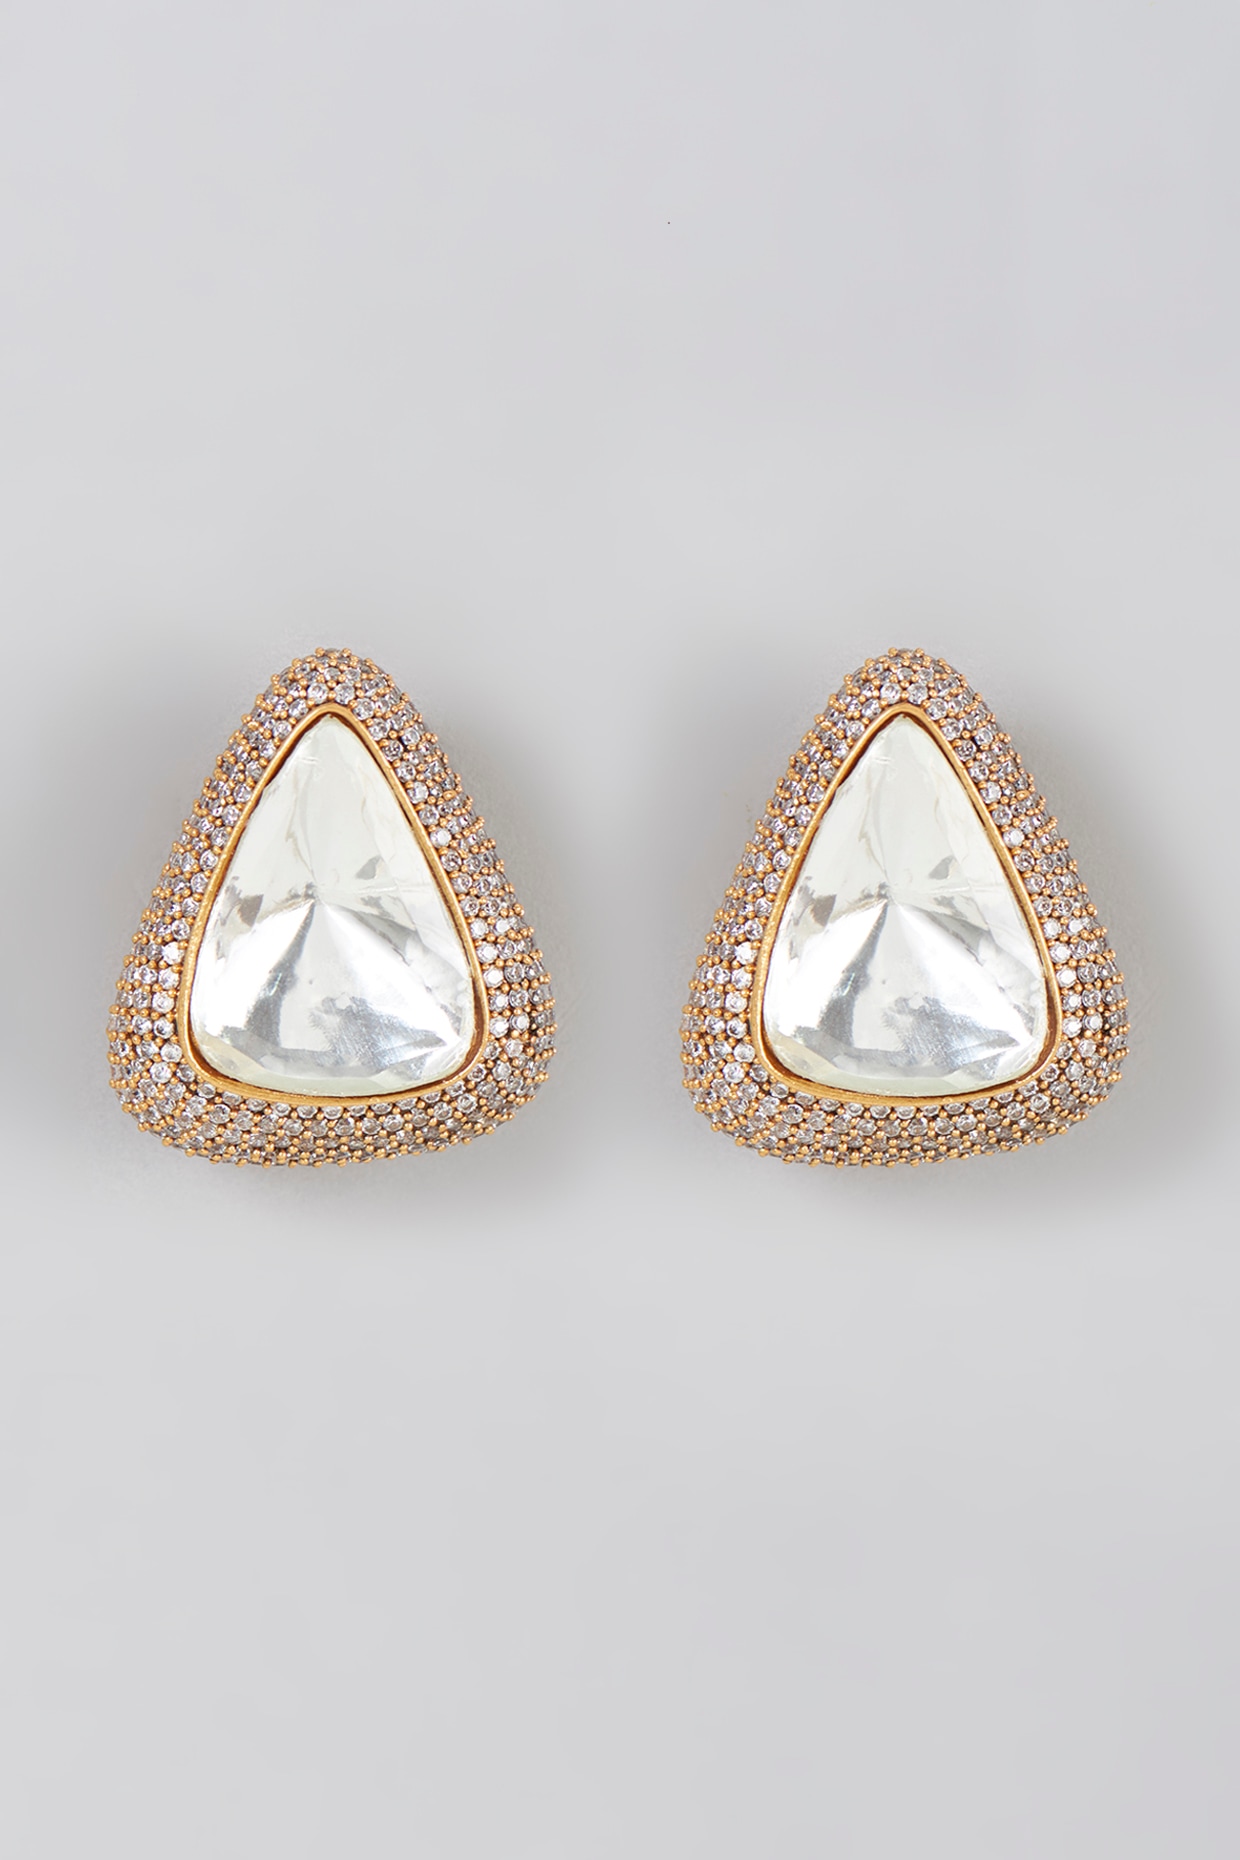 Buy Faux Diamond Earrings by DO TAARA at Ogaan Market Online Shopping Site